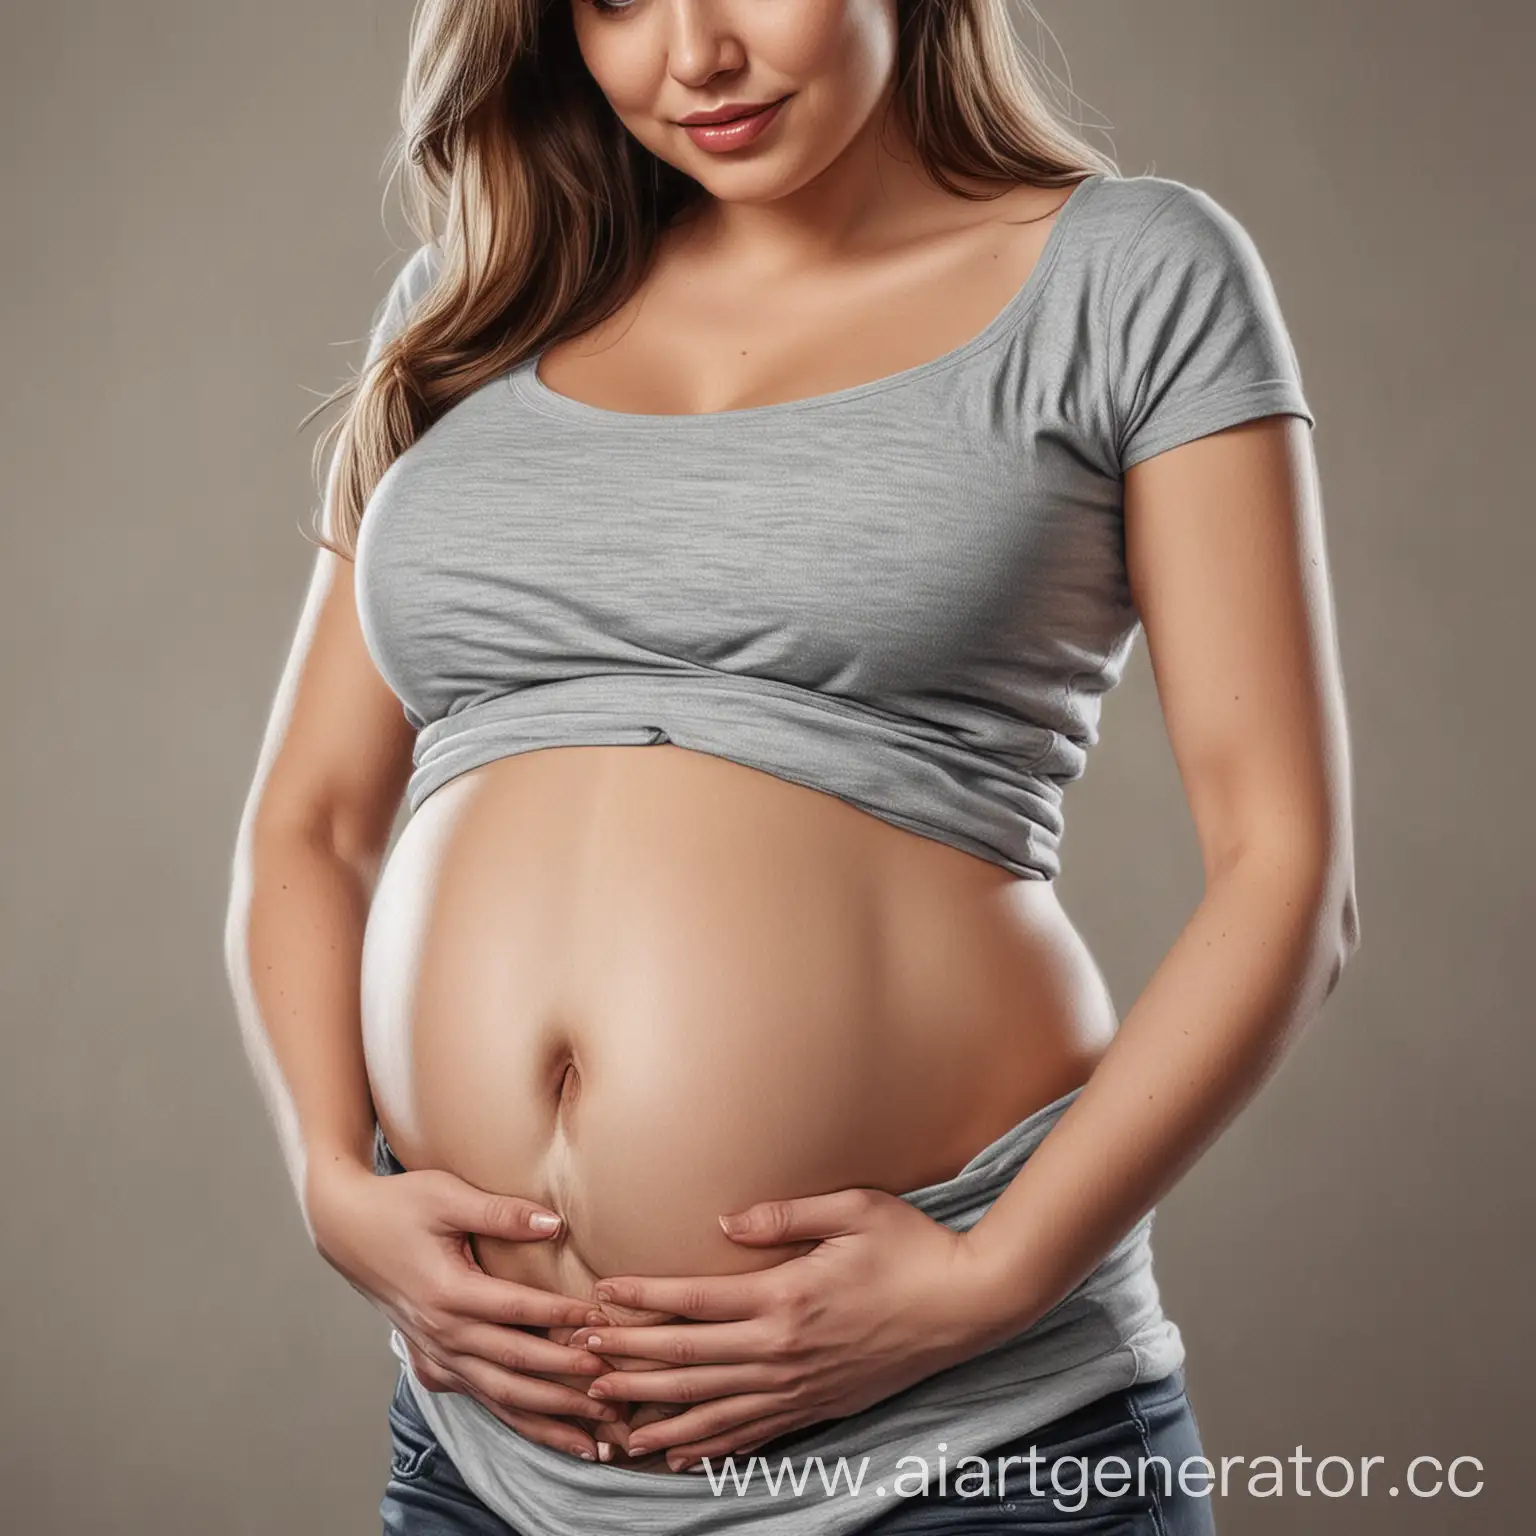 Realistic-Portrait-of-a-Pregnant-Woman-Smiling